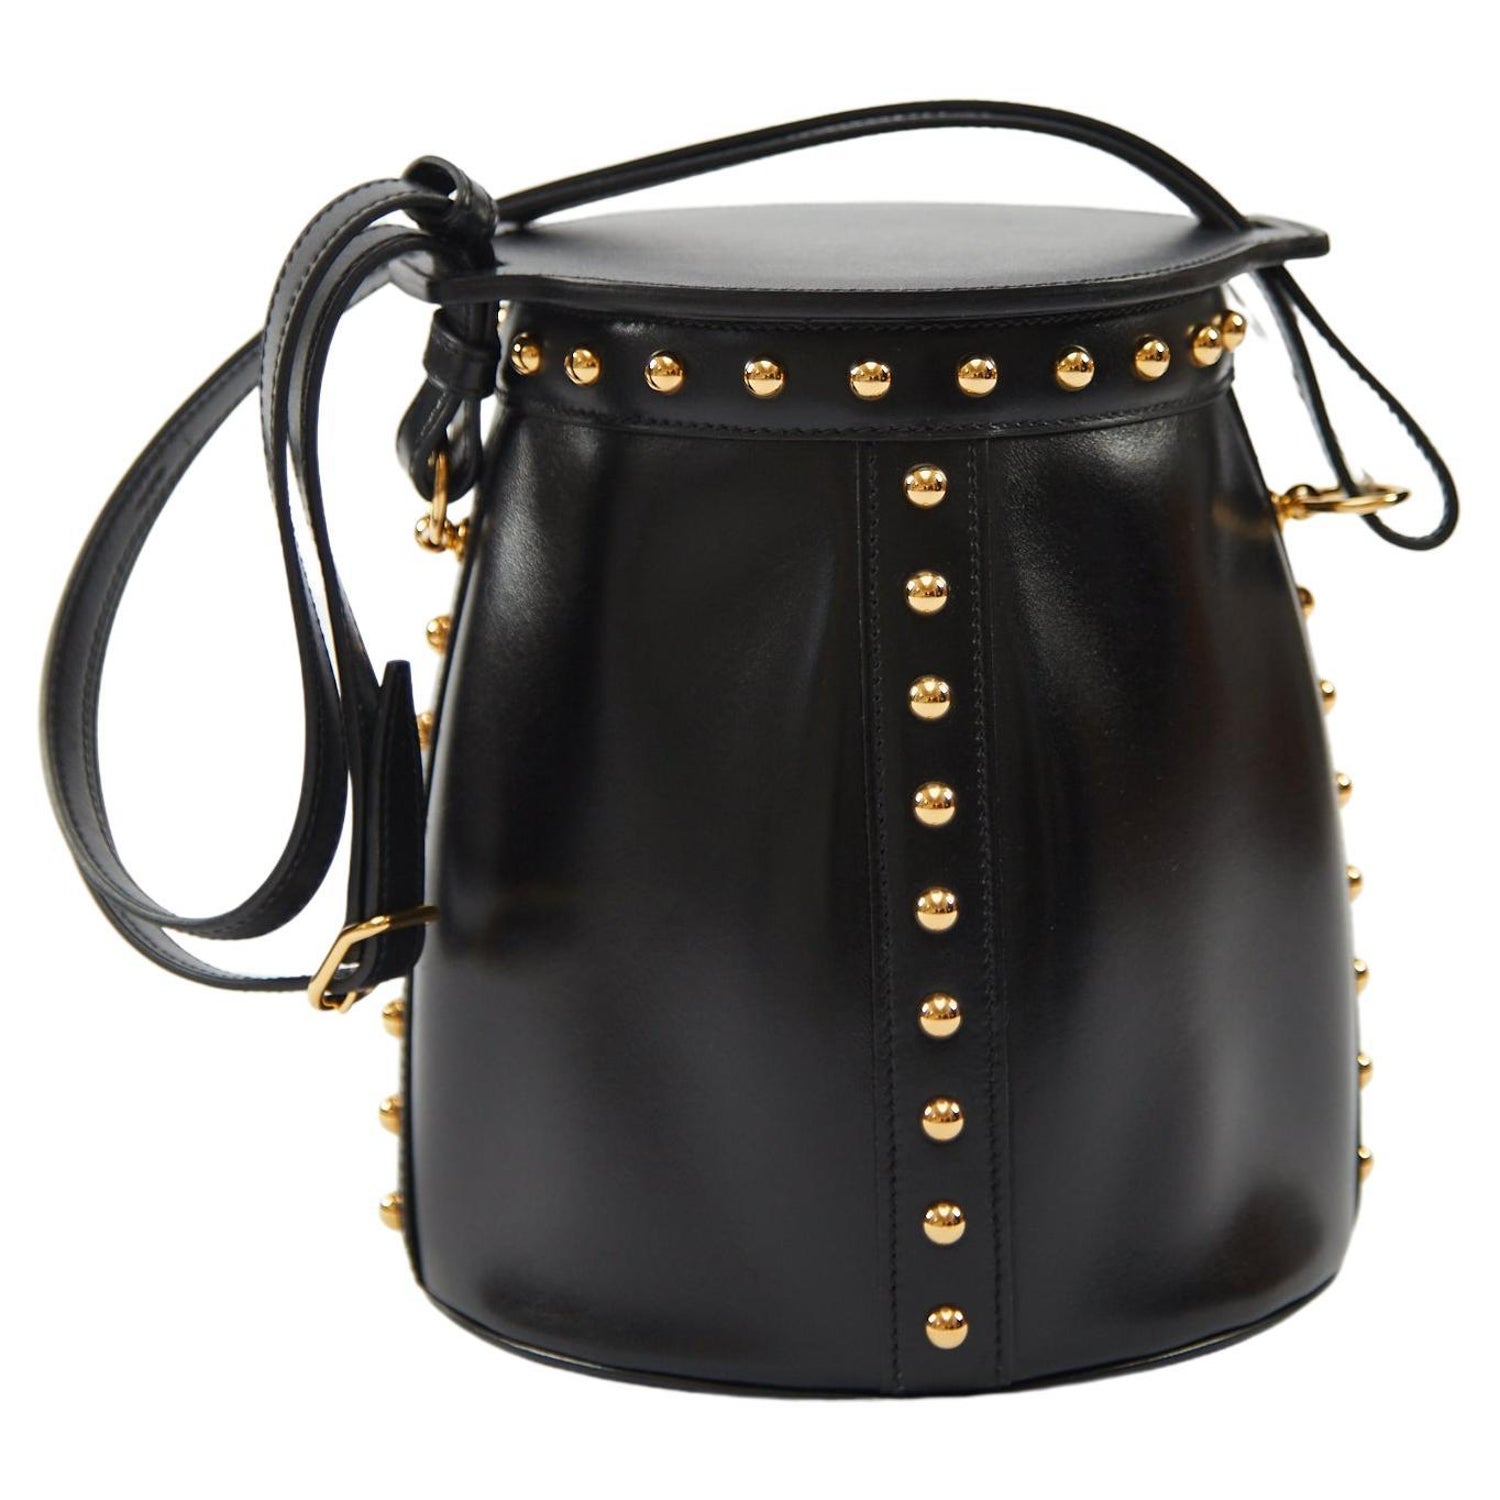 Hermès Black Sellier Kelly 25cm of Epsom Leather with Gold Hardware, Handbags and Accessories Online, 2019